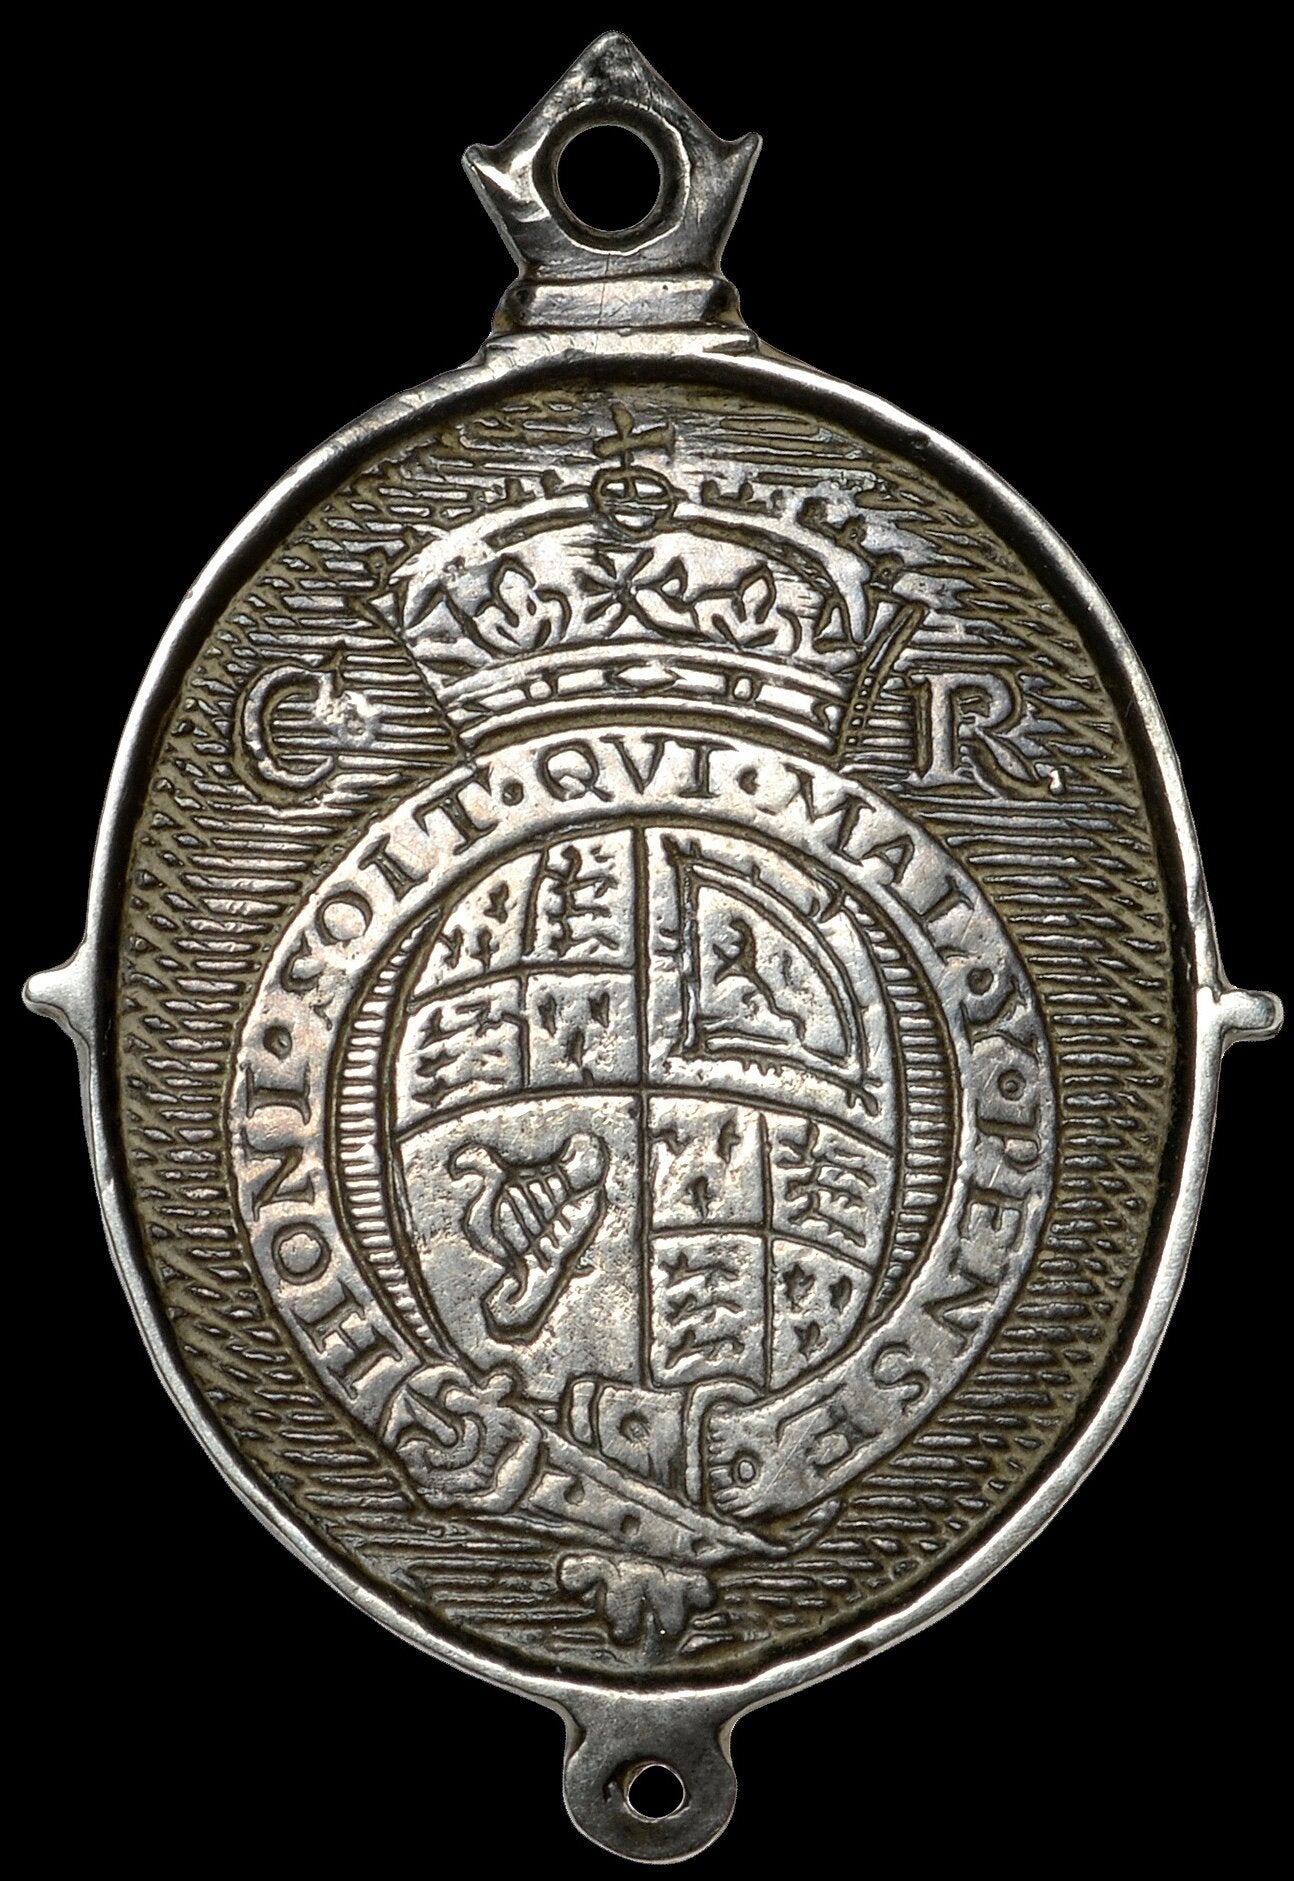 1649 (c) Charles II Royalist silver badge 26mm*22mm issued in exile MI 439/6 E206 NEF